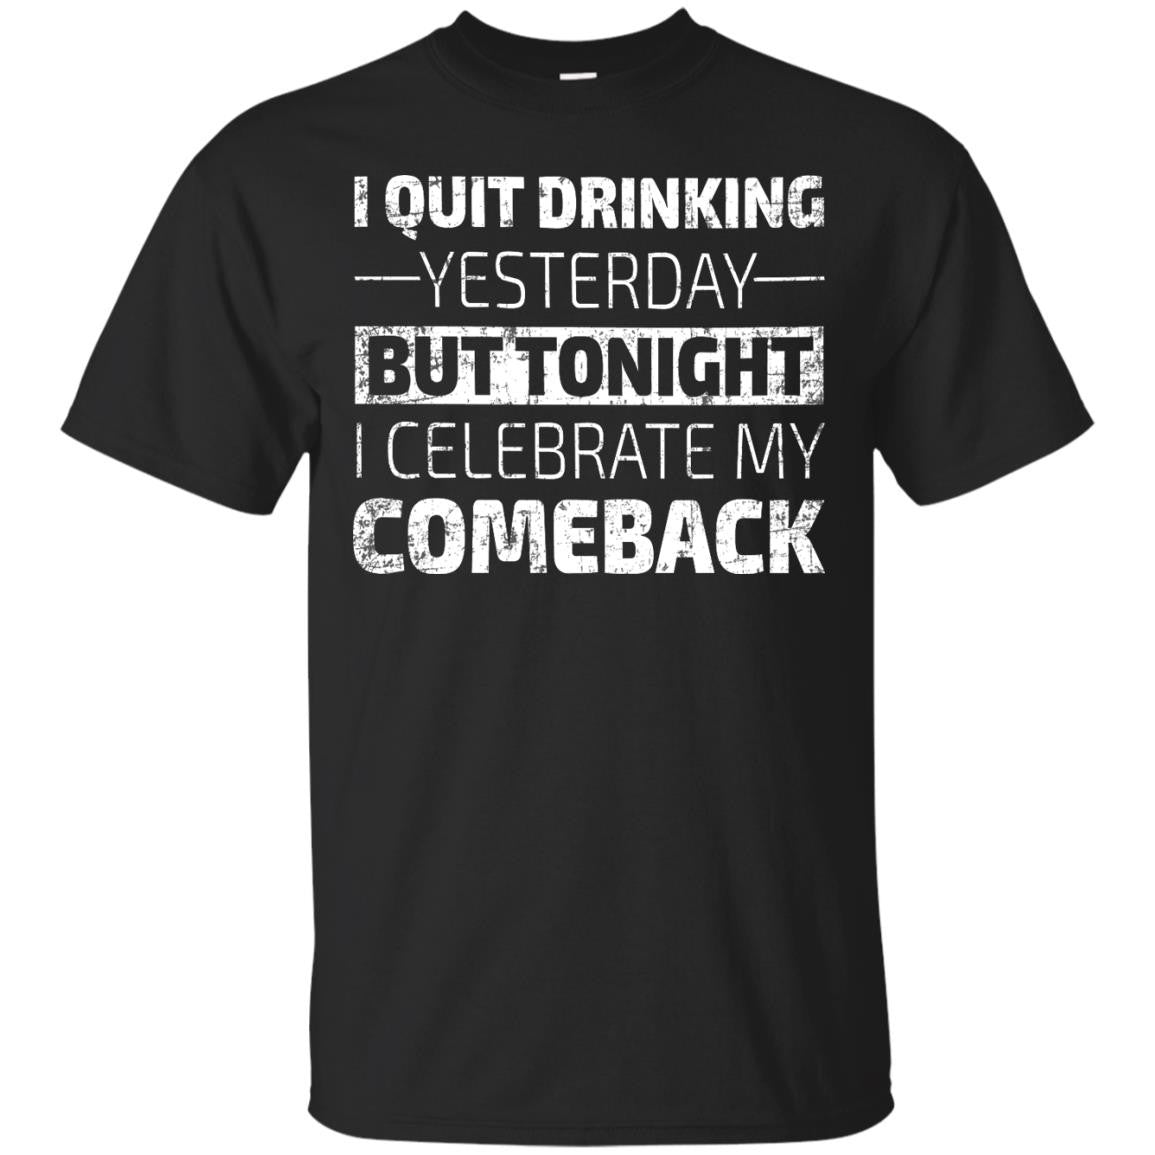 I Quit Drinking Yesterday But Tonight I Celebrate My Comeback T-Shirt Apparel - The Beer Lodge